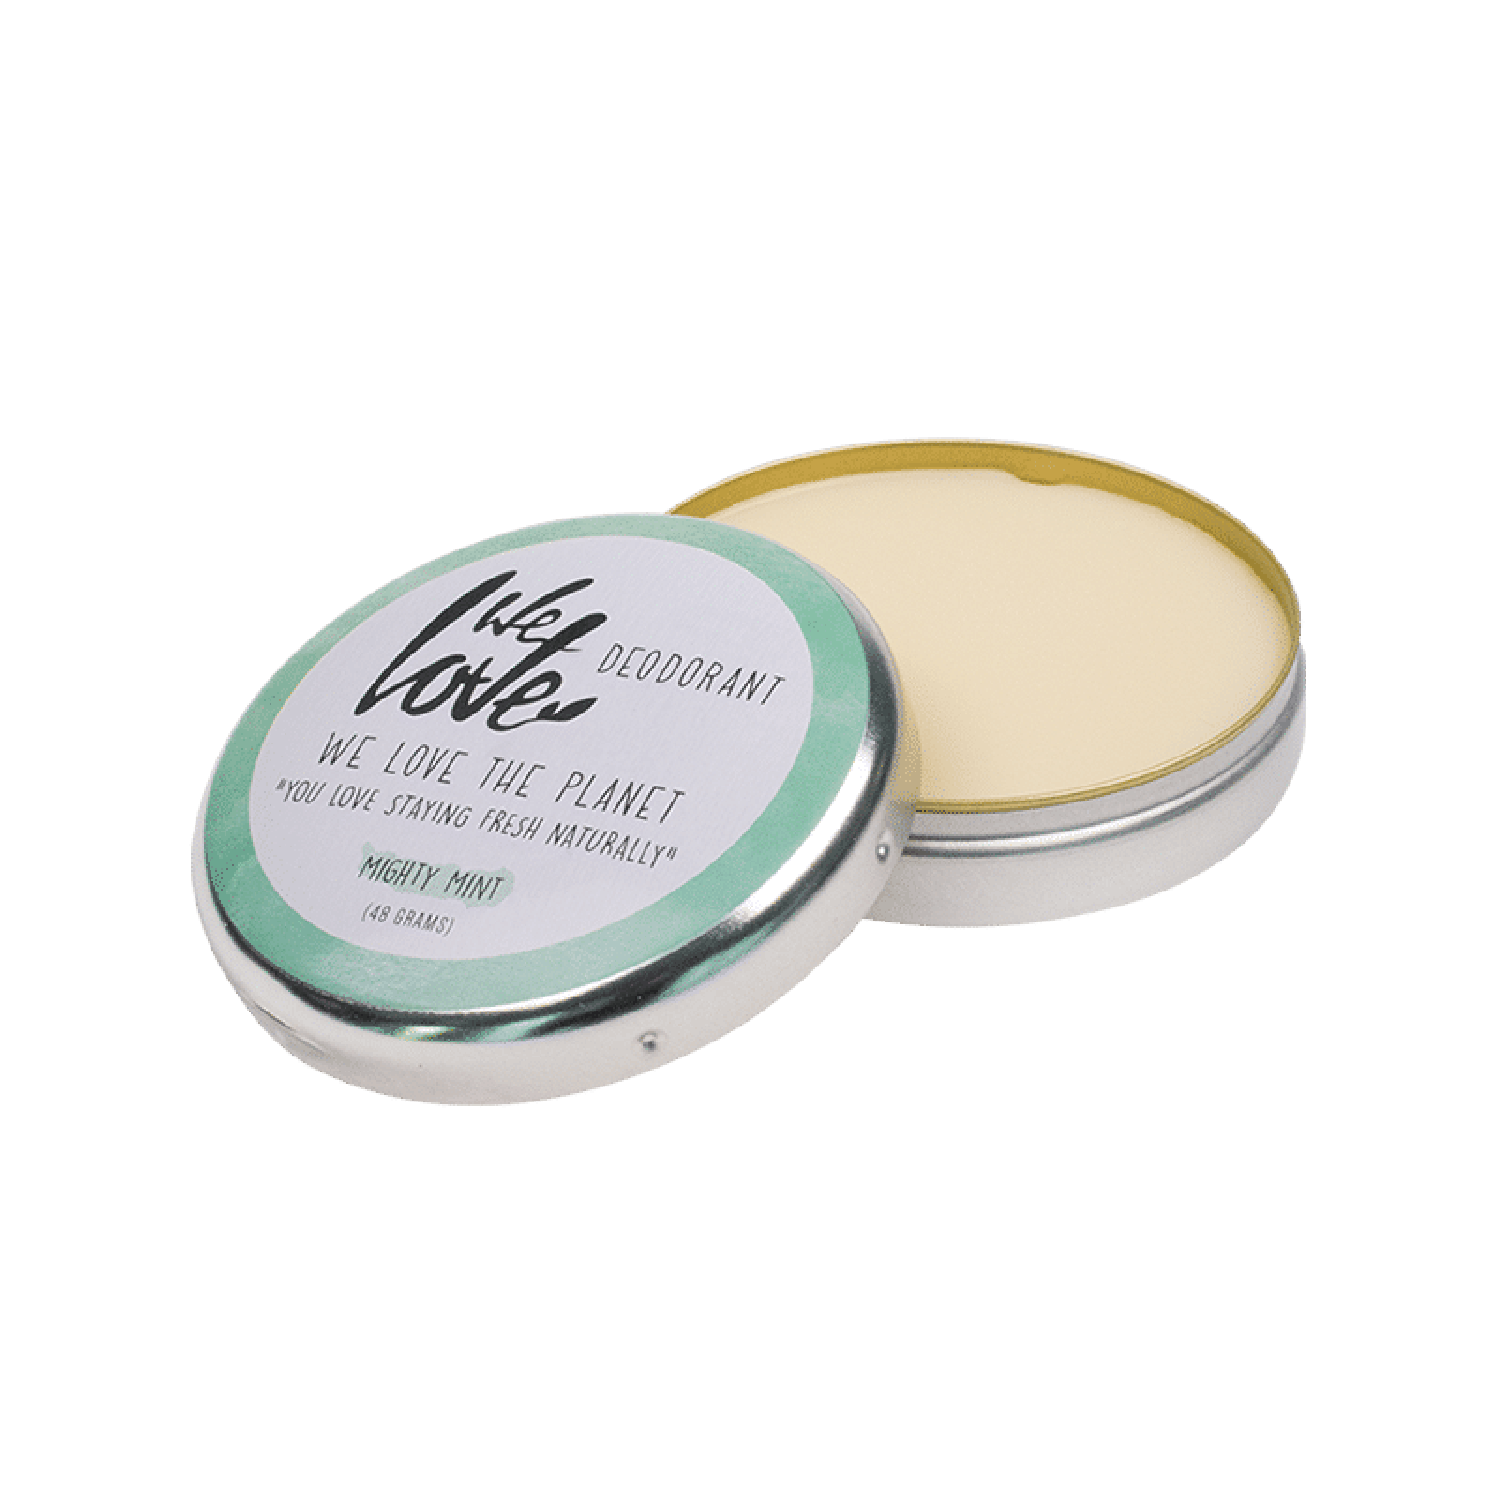 Mighty Mint Natürliches Deocreme » We love the Planet